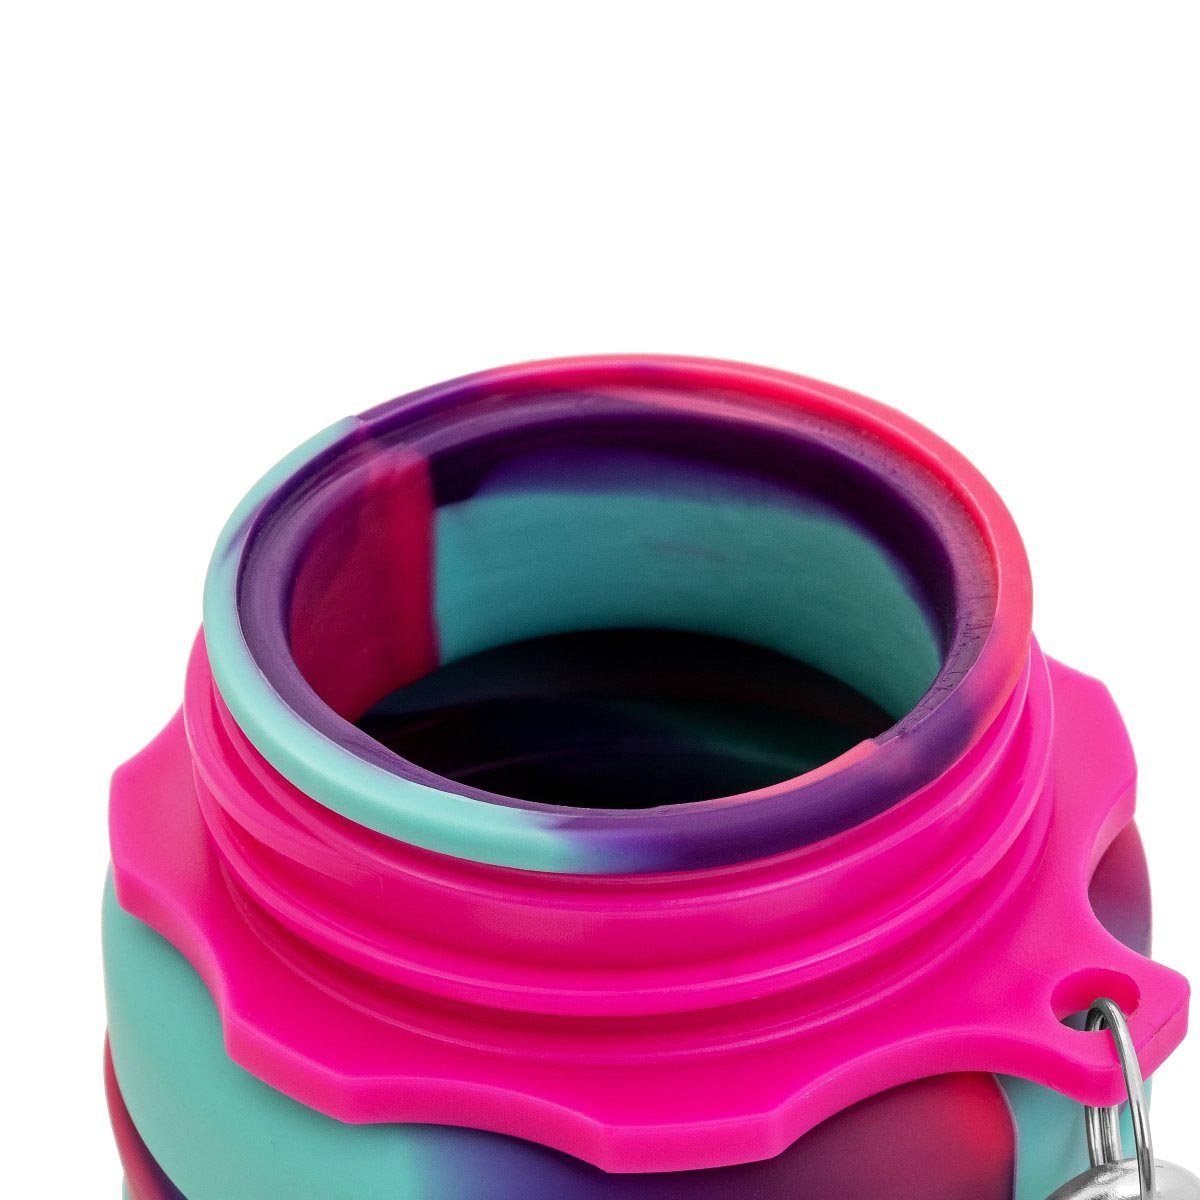 Portable Collapsible Silicone Water Bottle with a Straw Lid Uncovered